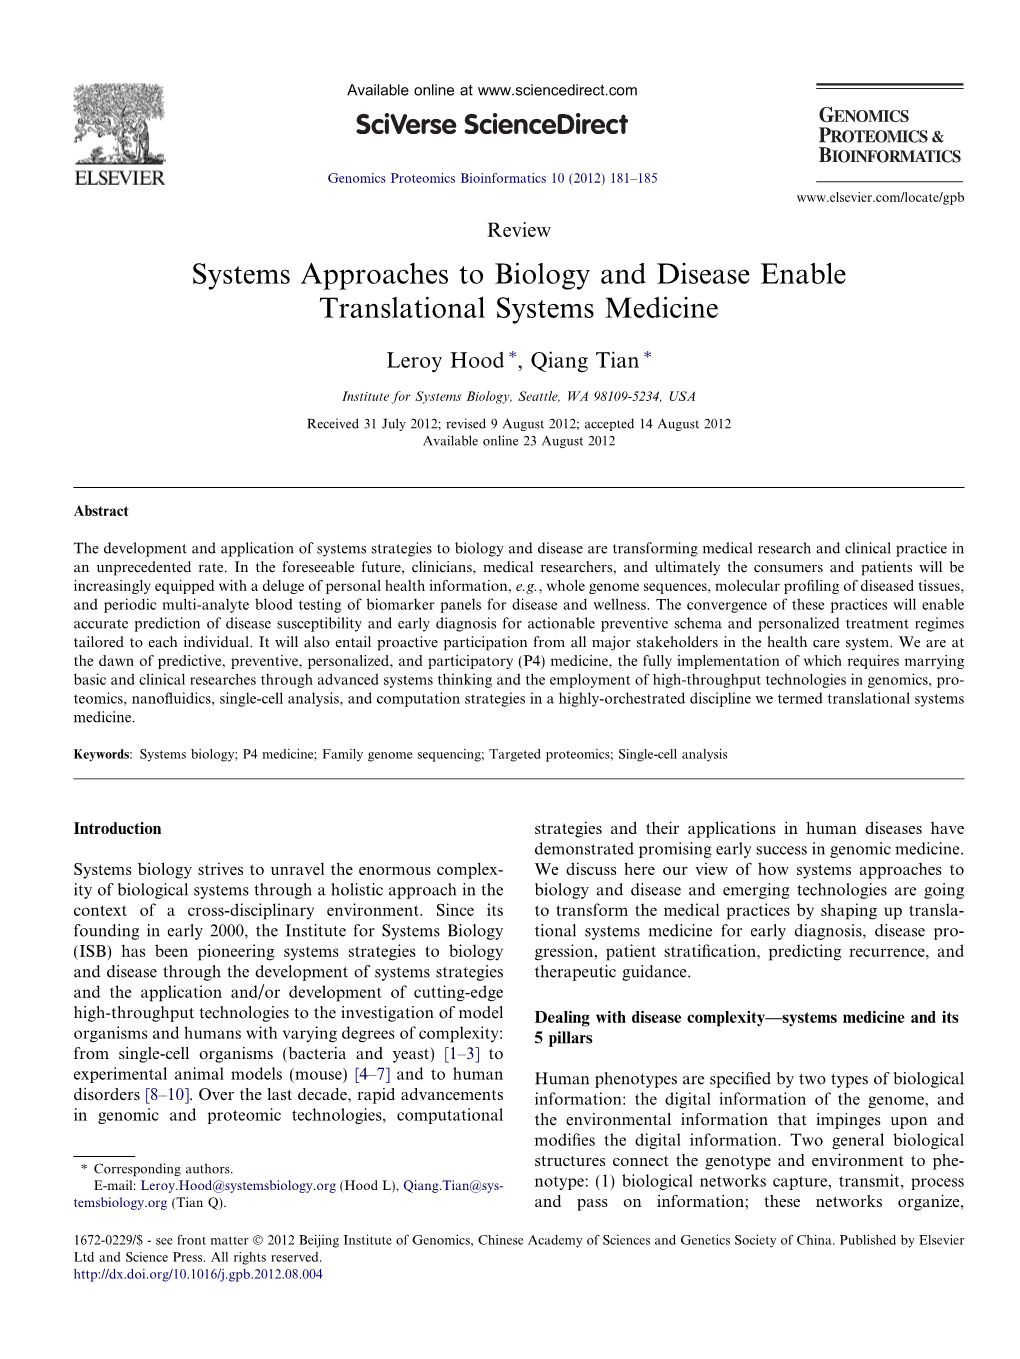 Systems Approaches to Biology and Disease Enable Translational Systems Medicine